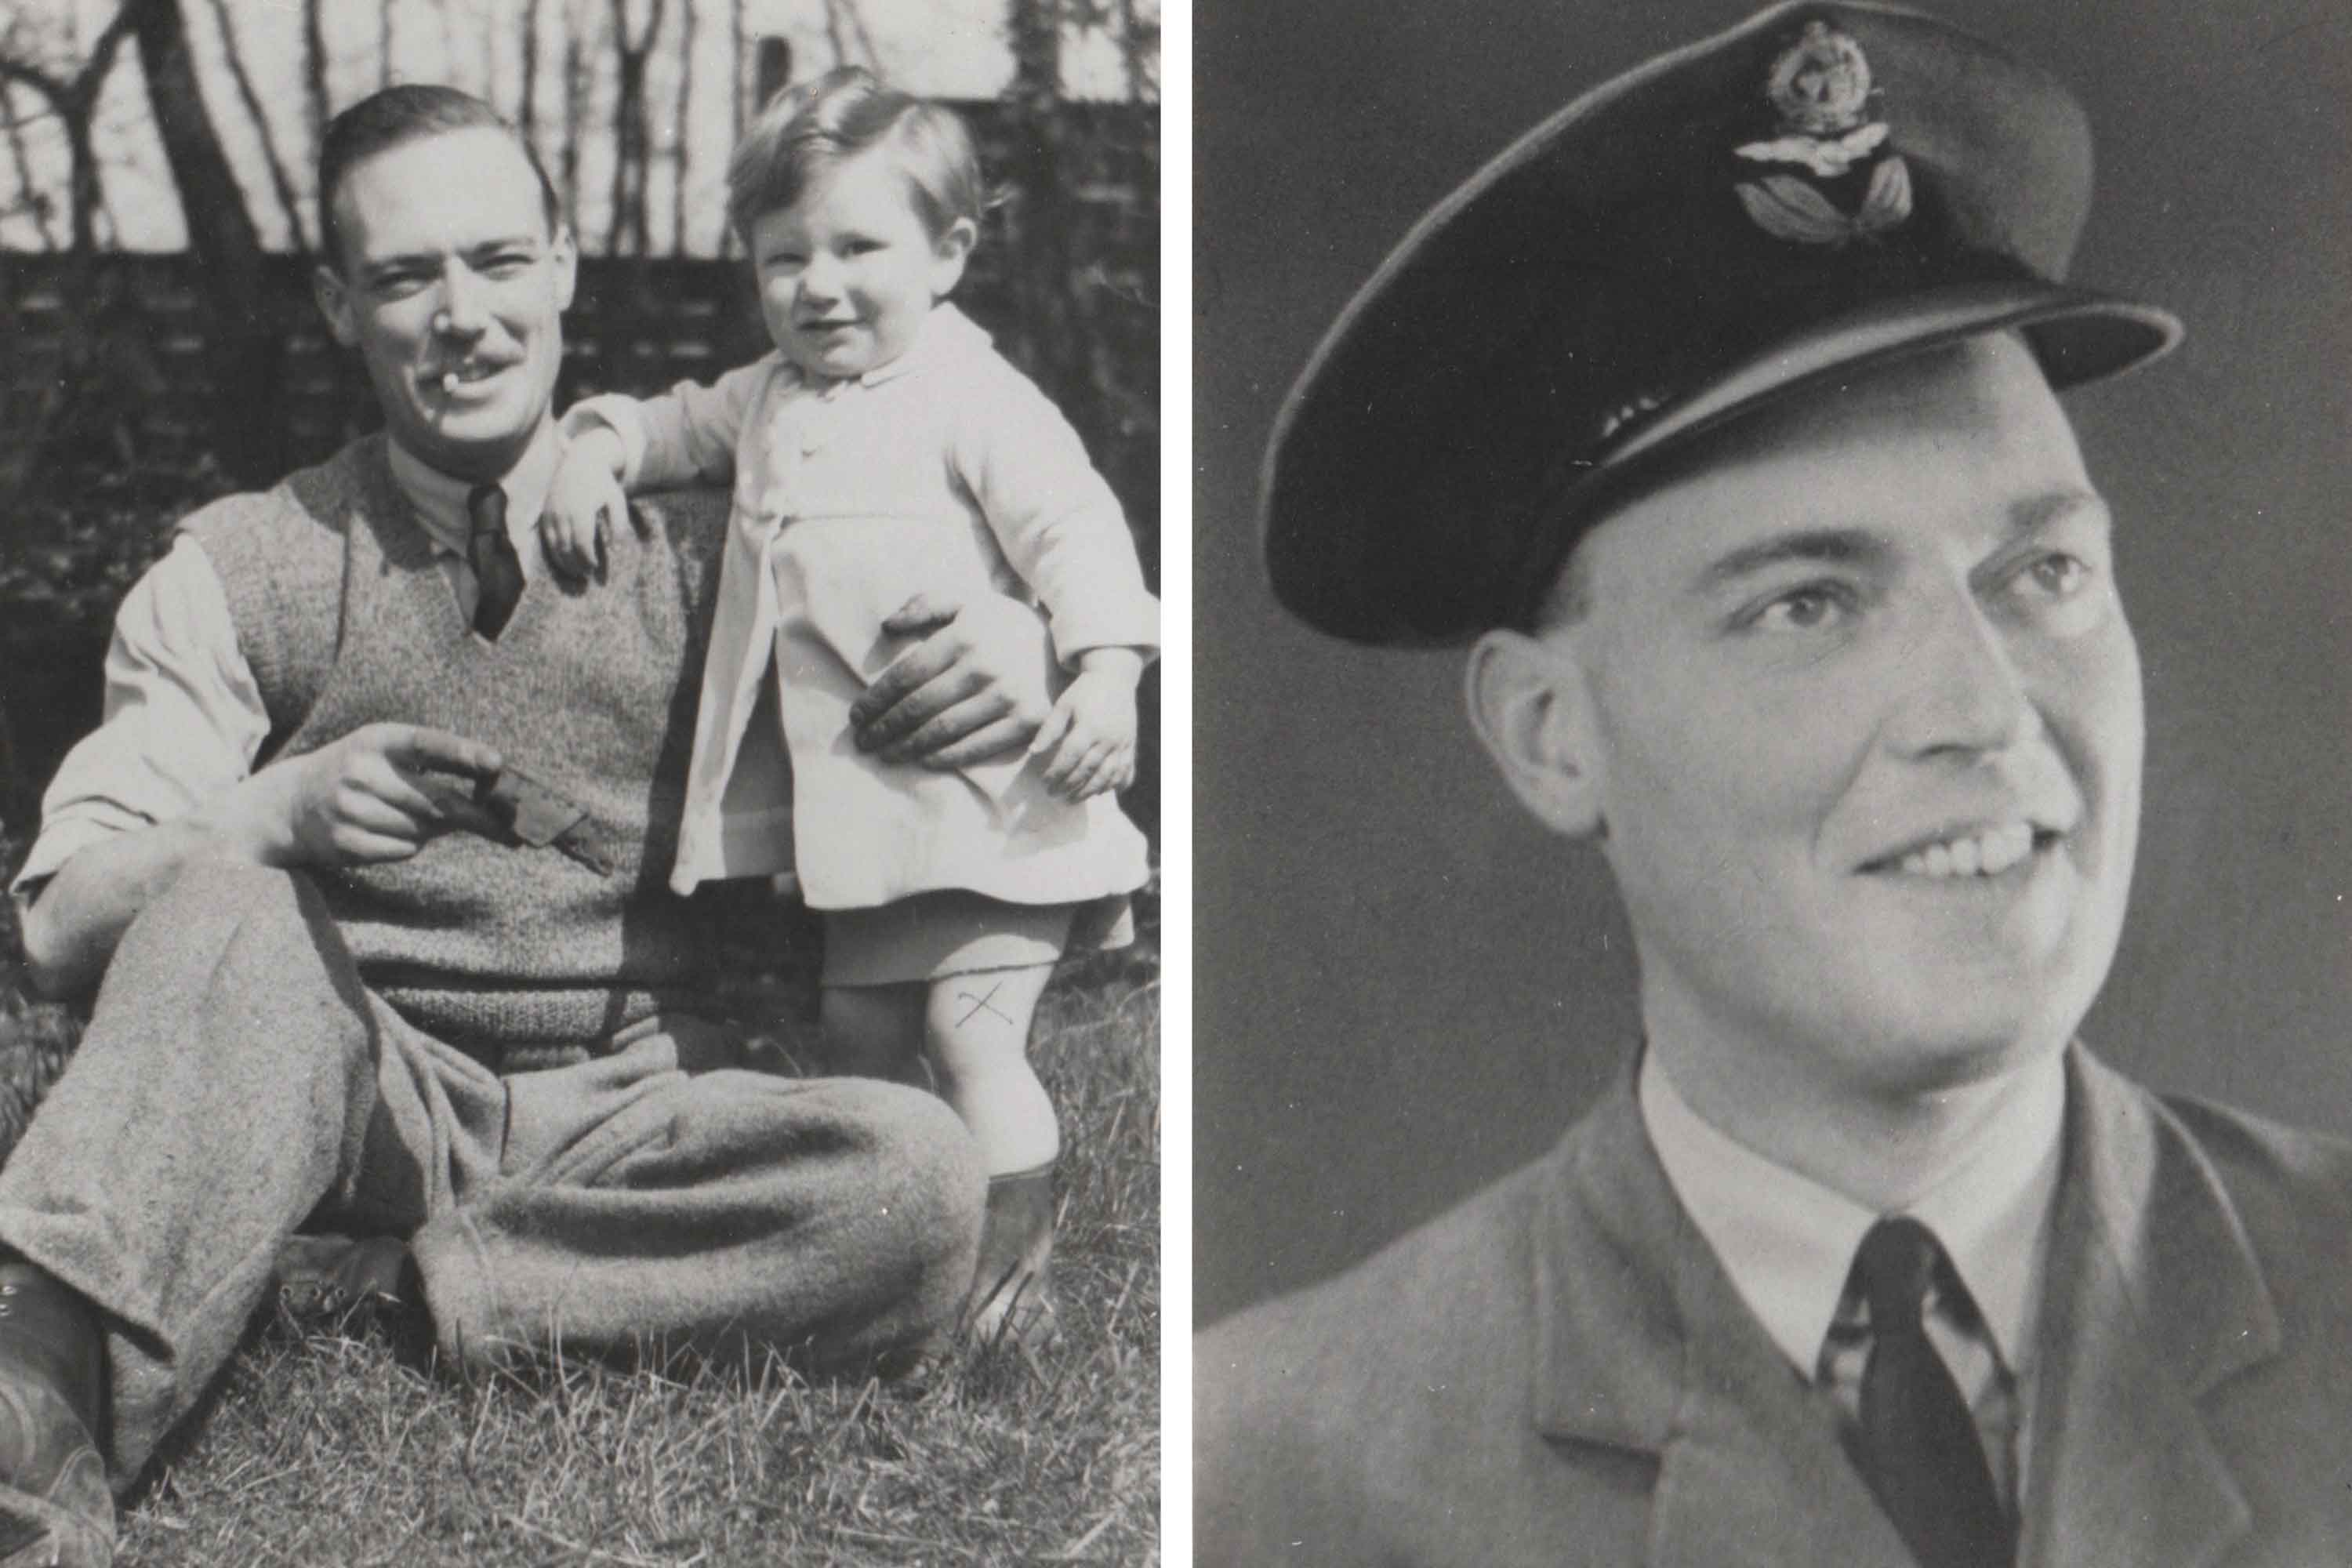 Black and white image of Adrian Beare as a child with his father, Lennie sat outside. On the right is a black and white image of Adrian in RAF uniform